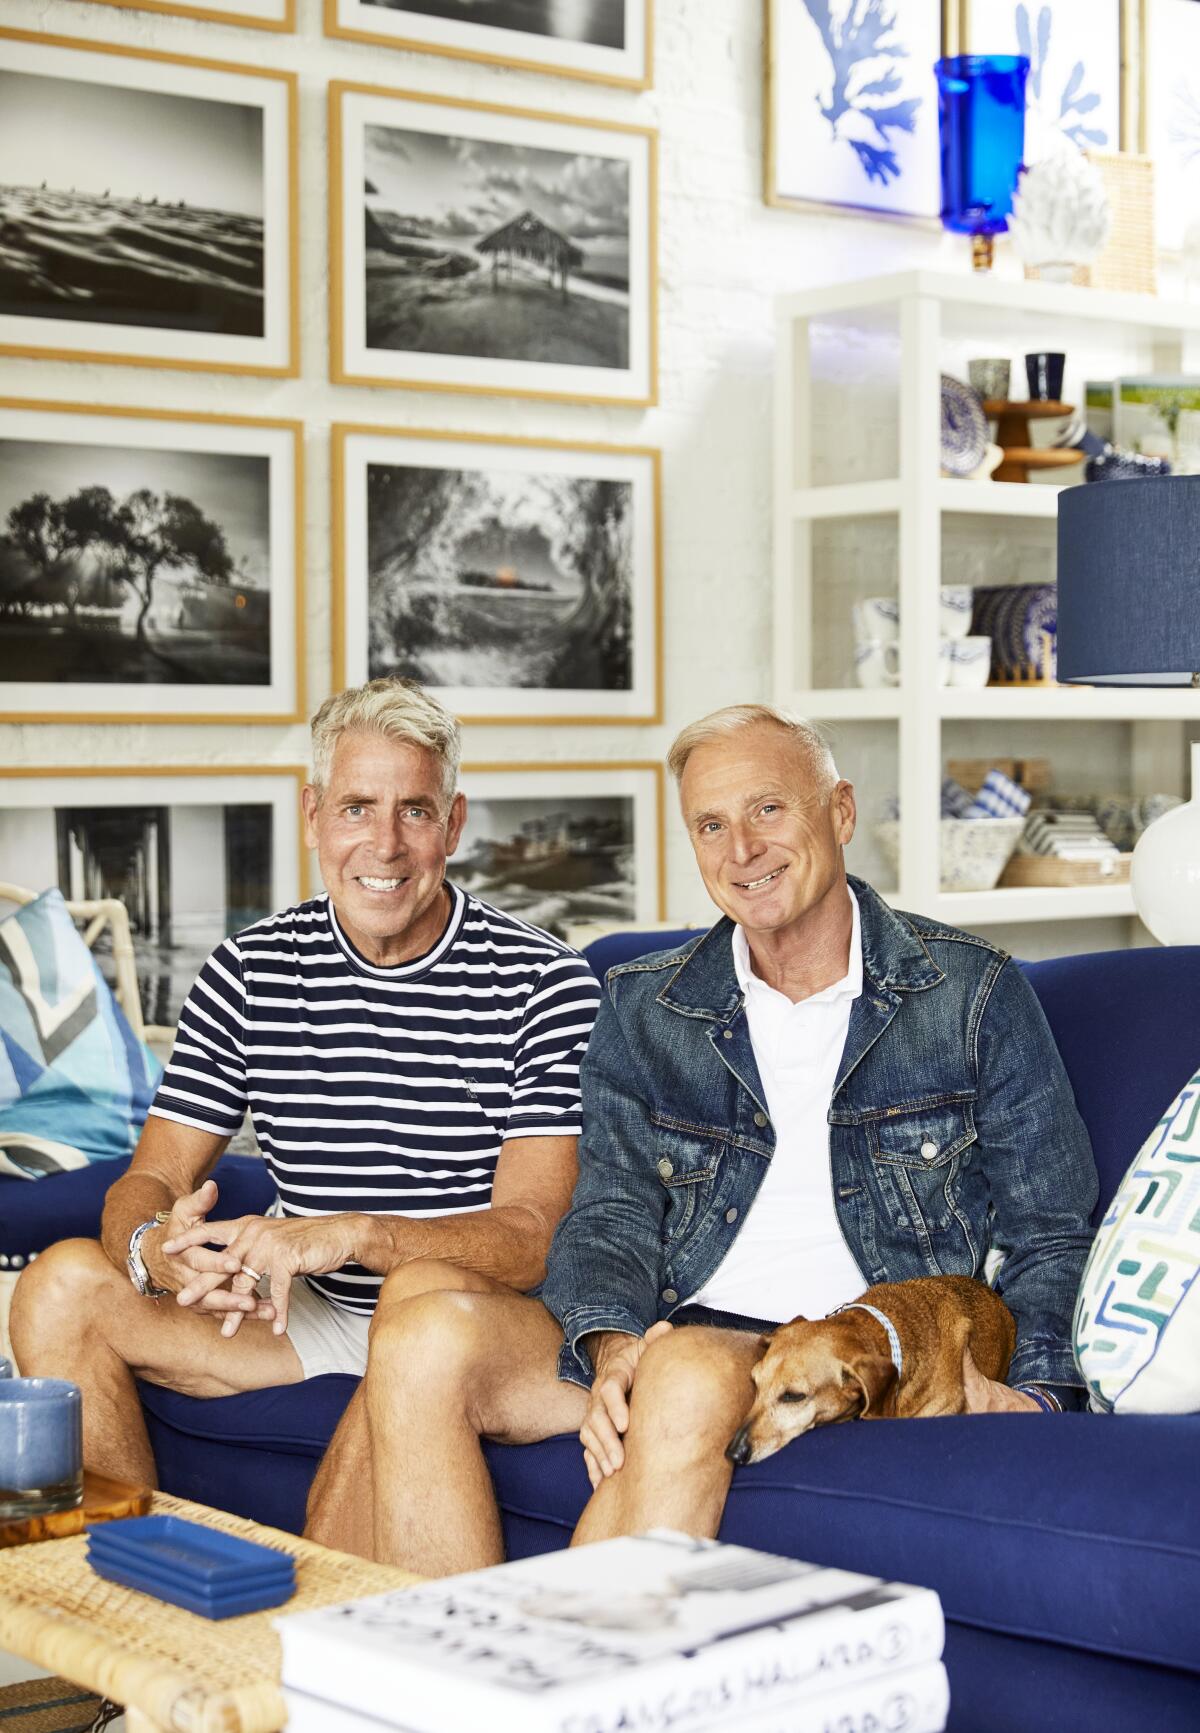 Retail veterans Patrick Wade and Dave DeMattei founded Mood Indigo after moving to La Jolla last year.